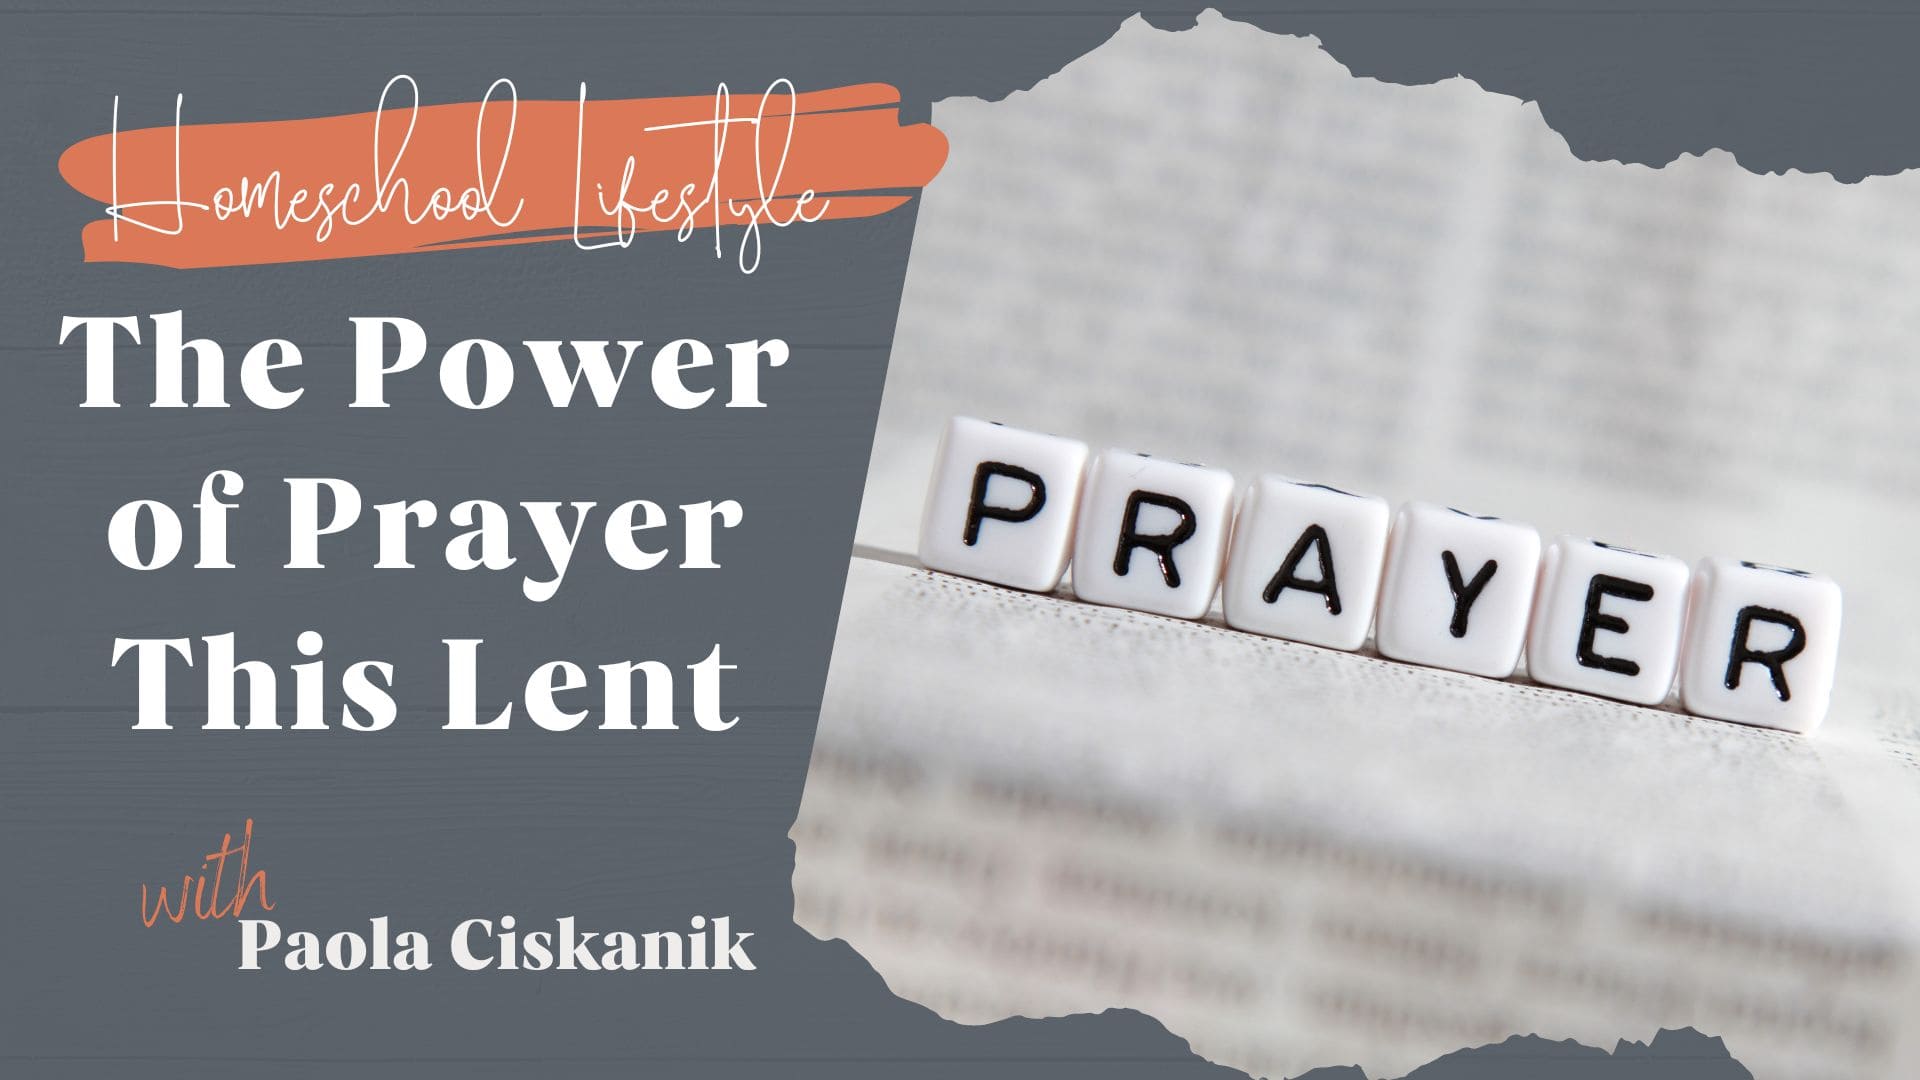 The Power of Prayer This Lent